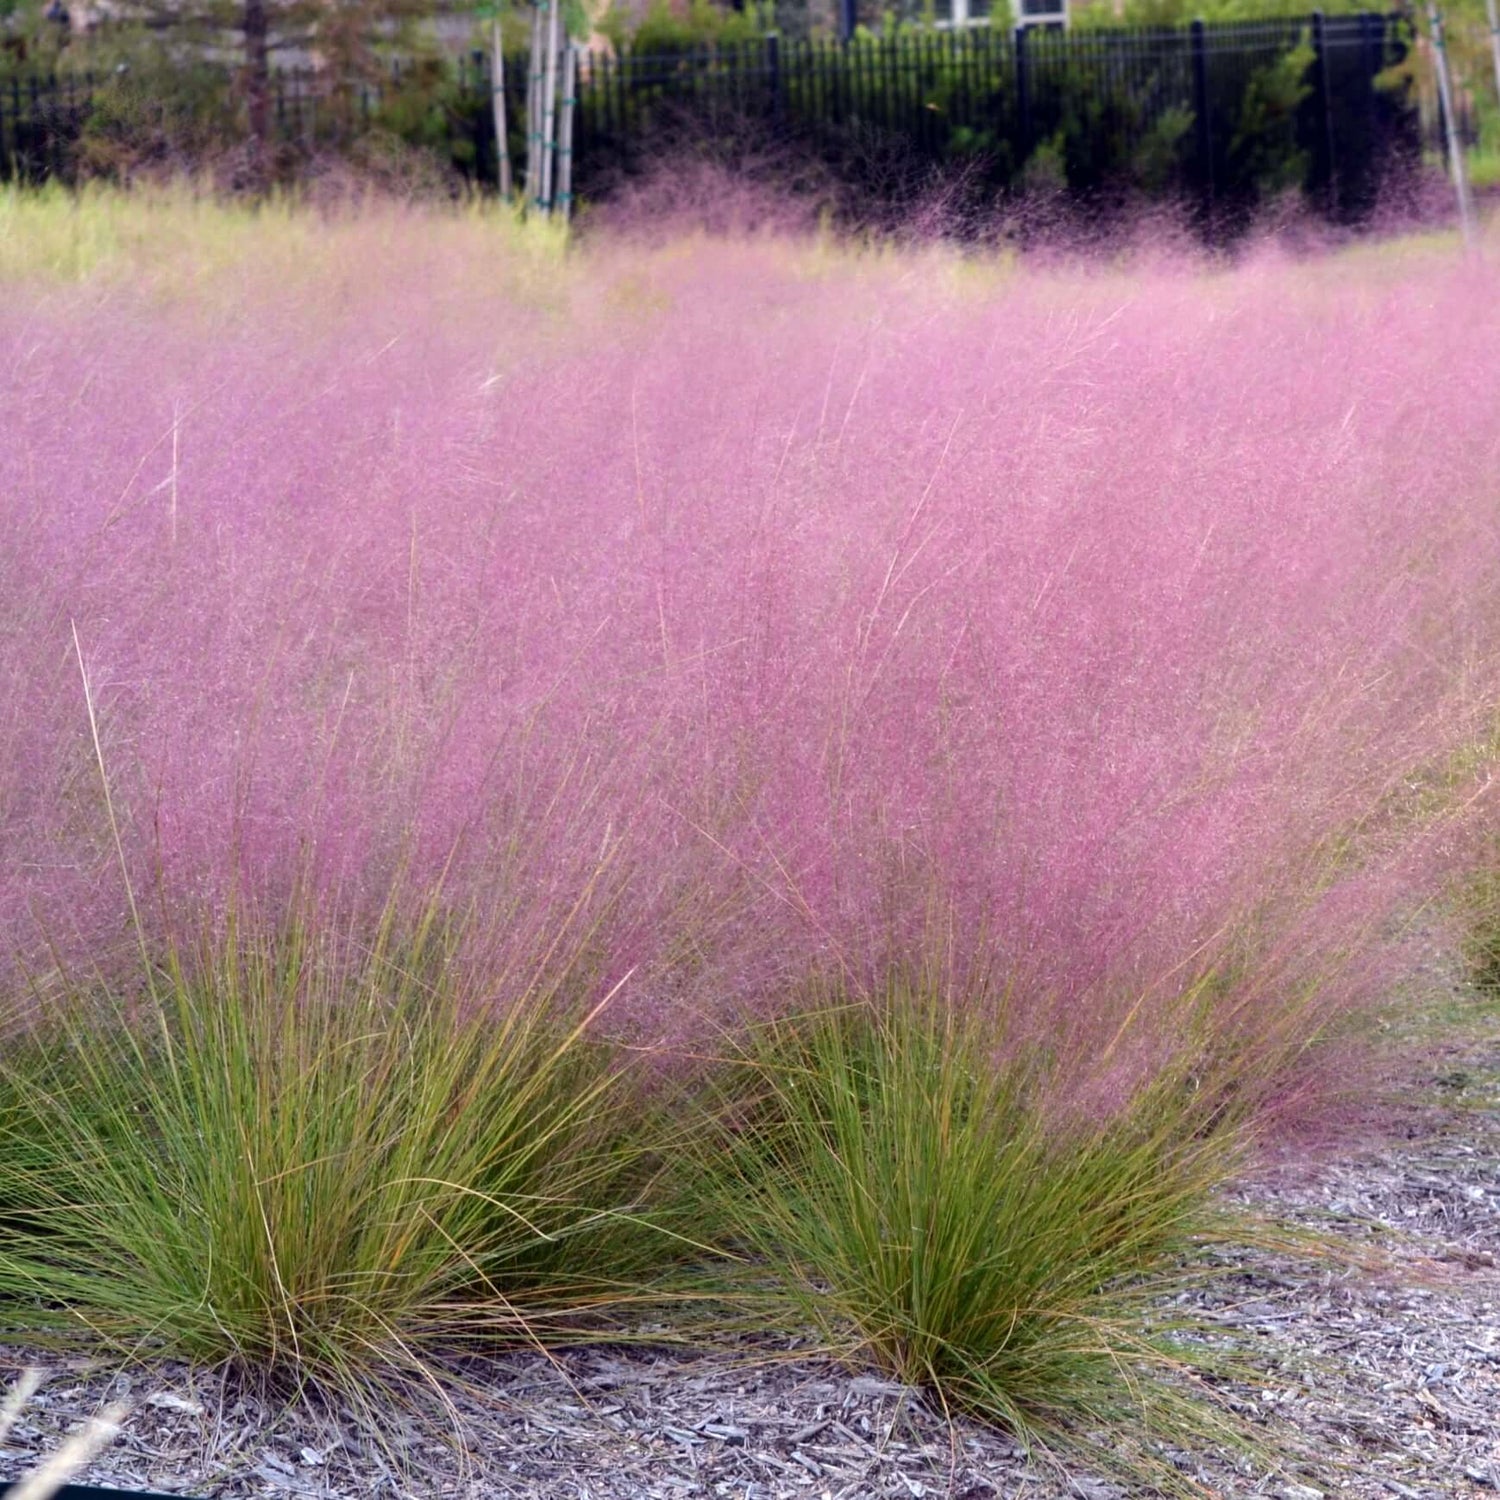 Ornamental grass with pinkish-purple plumes, known as muhly grass, swaying gracefully in the wind.